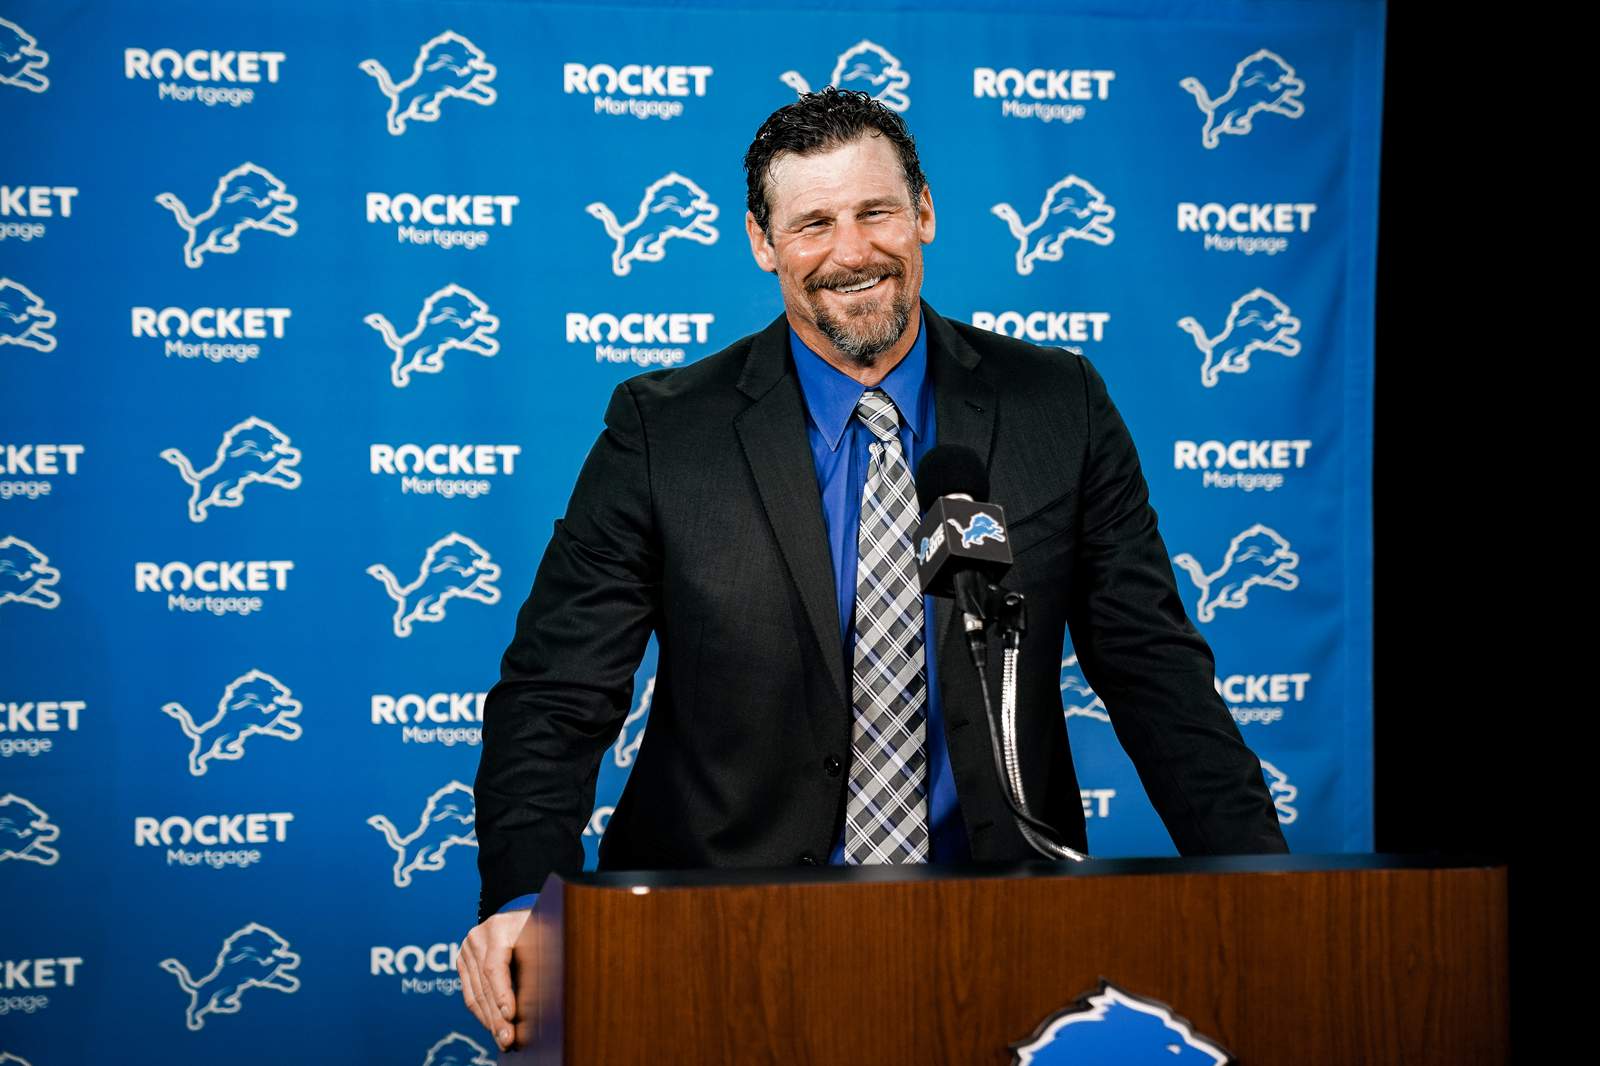 Dan Campbell’s memorable intro gets mixed reviews from Lions fans, pundits